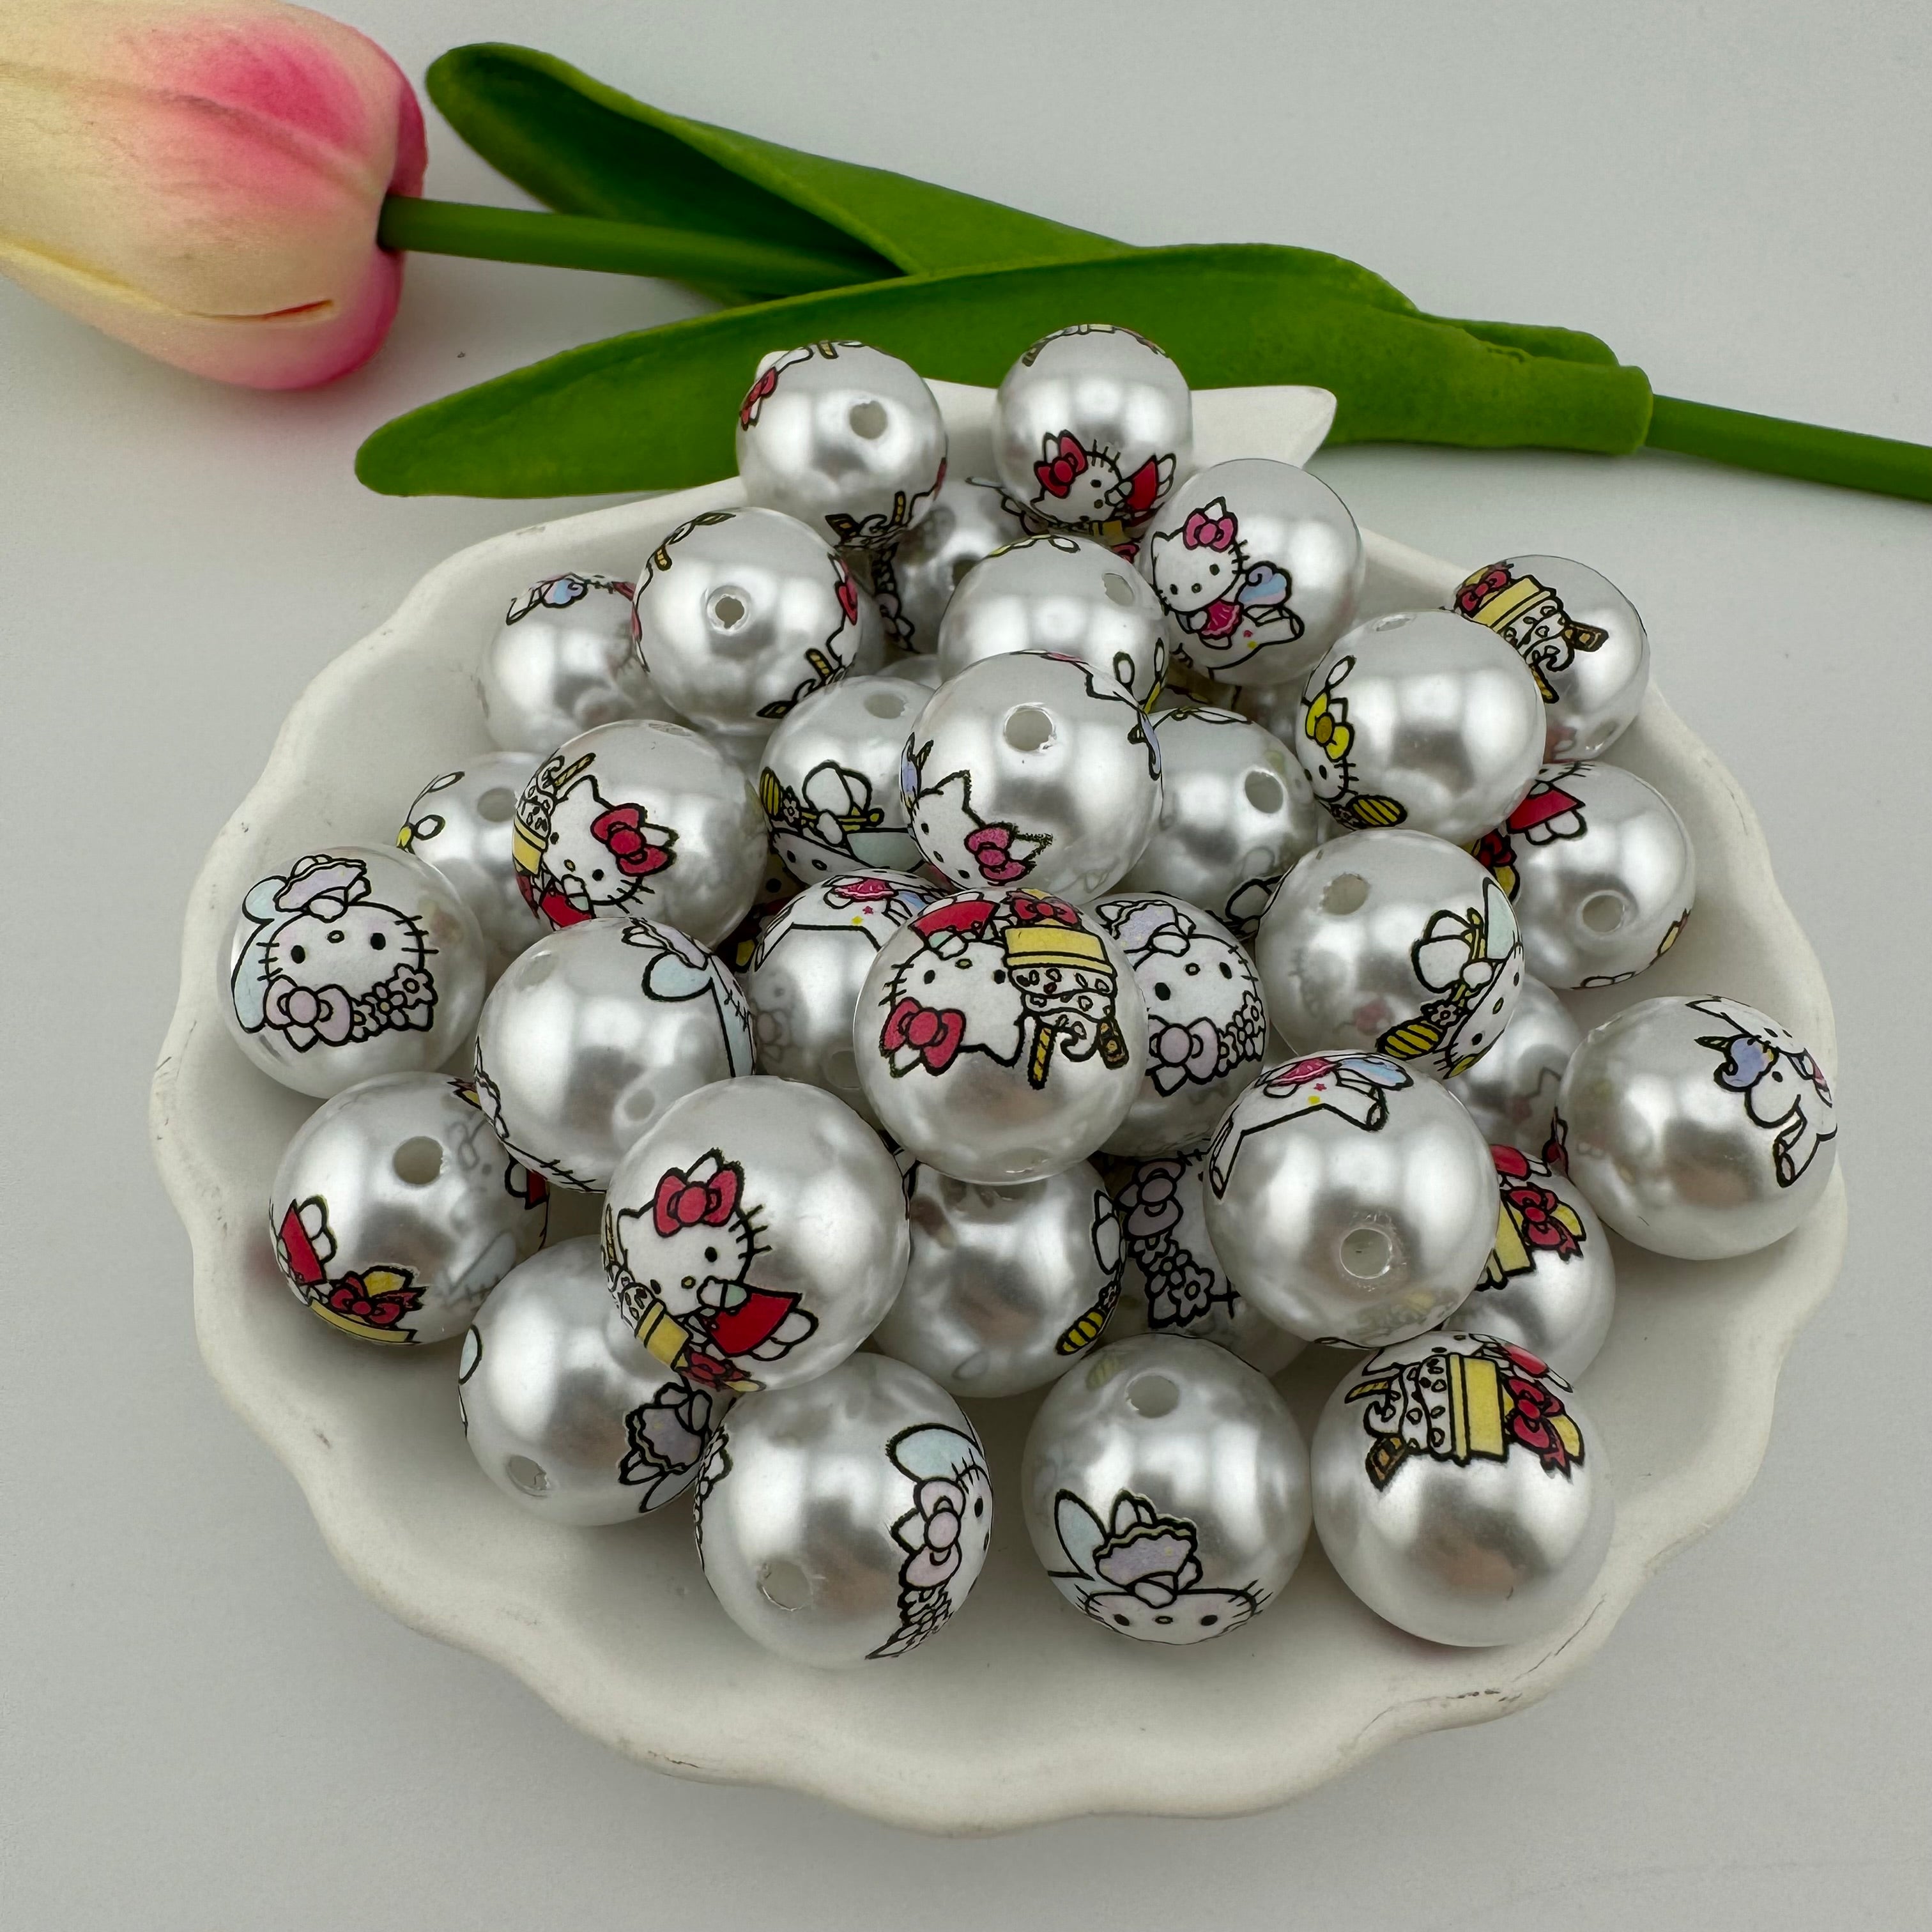 50 Pieces16mm HK  Pearl Looking Resin Beads